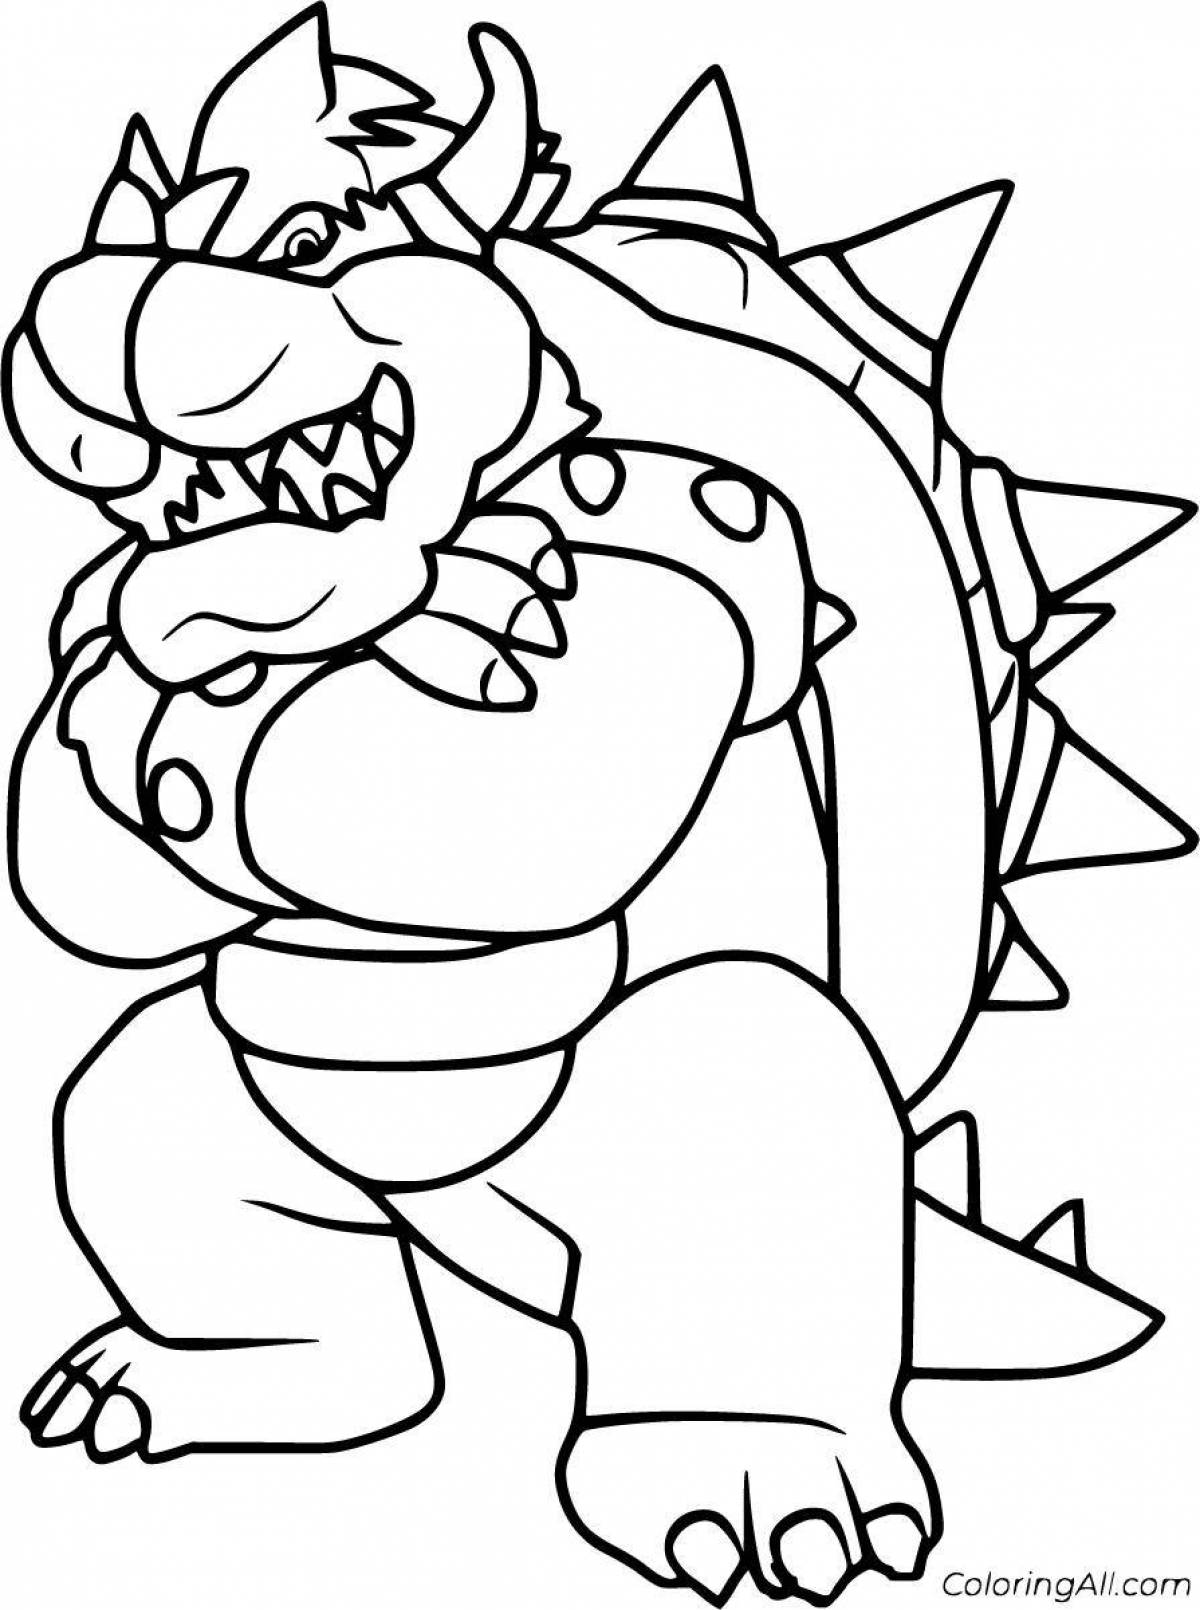 Dazzling bowser coloring